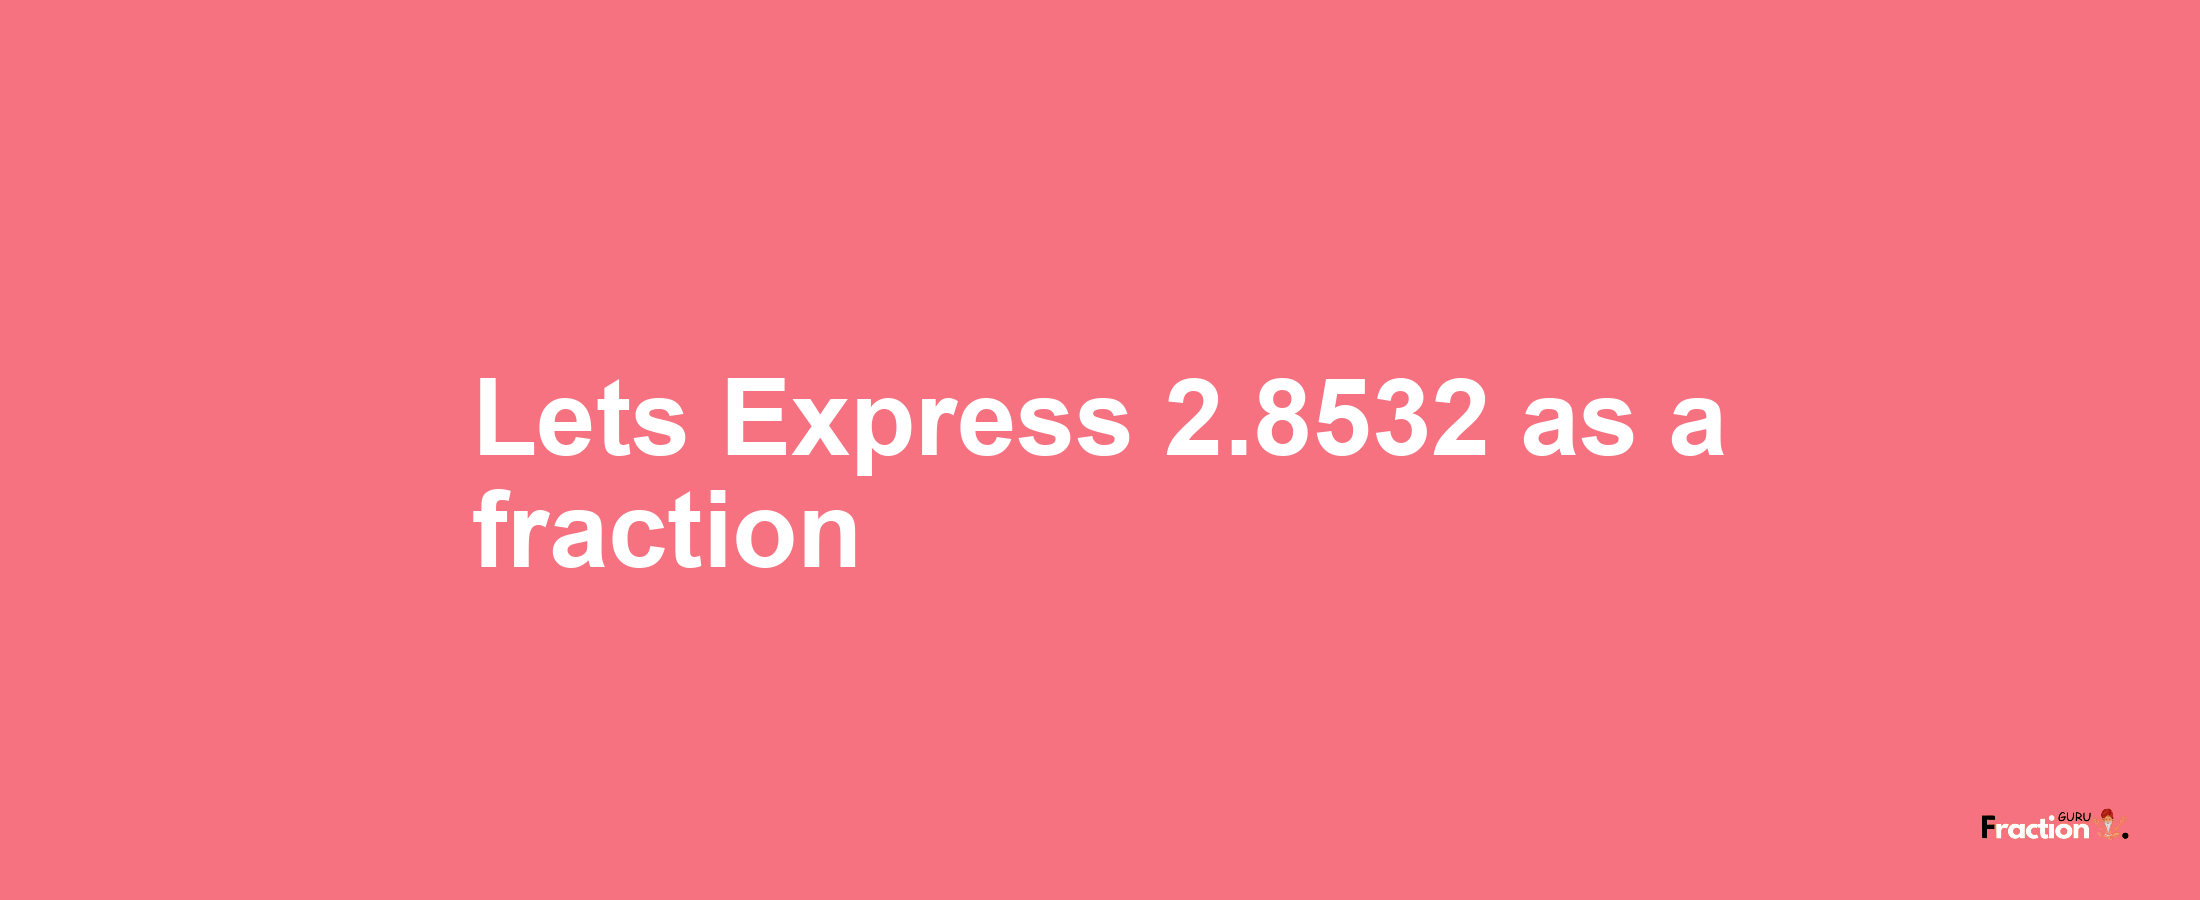 Lets Express 2.8532 as afraction